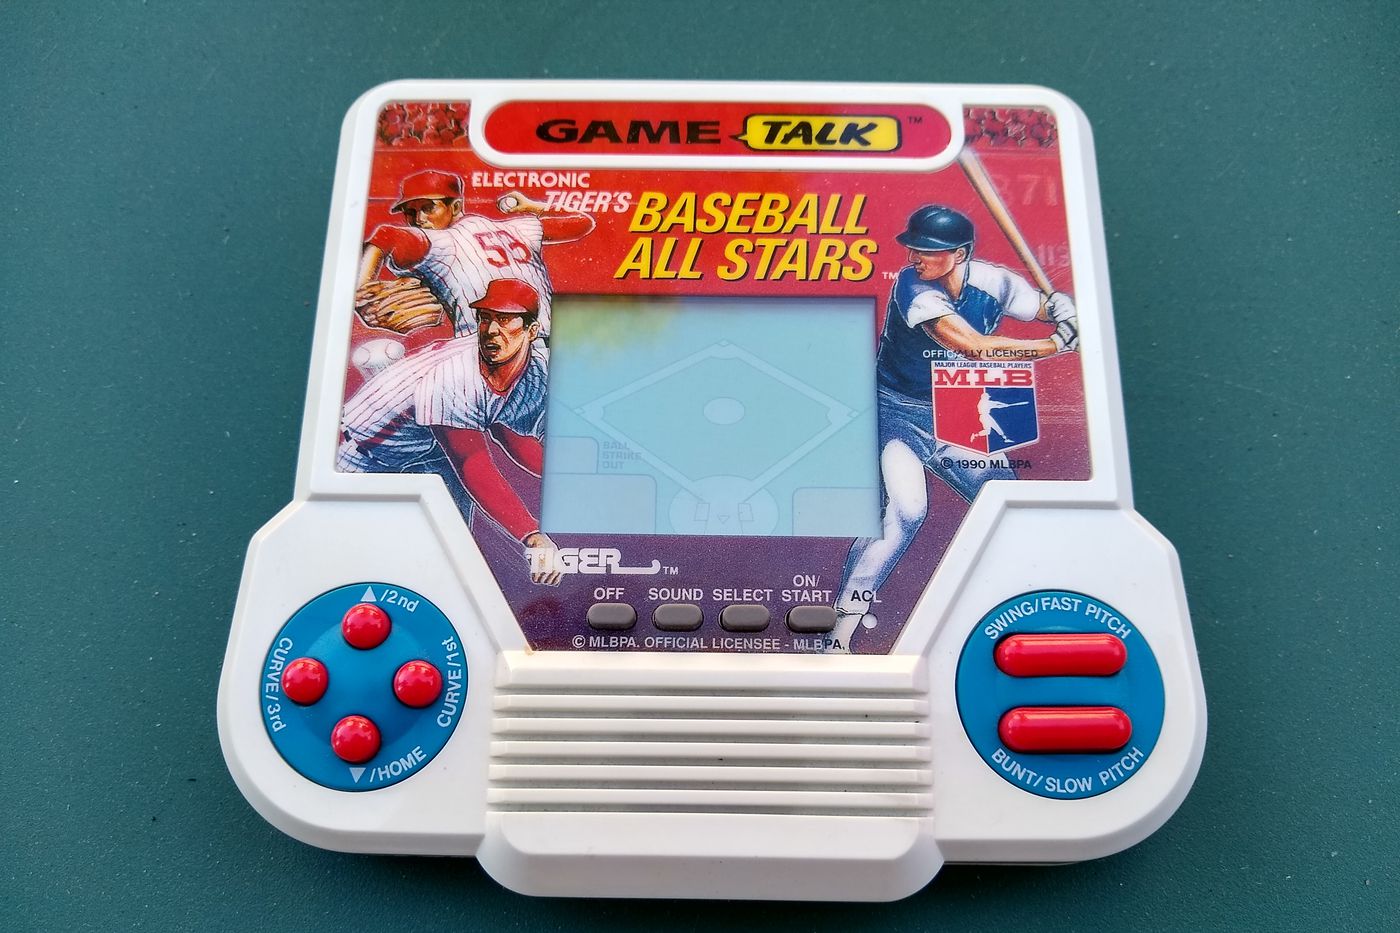 Tiger Electronics BEEPERS BASEBALL LCD Handheld Game 1996 NEW SEALED 